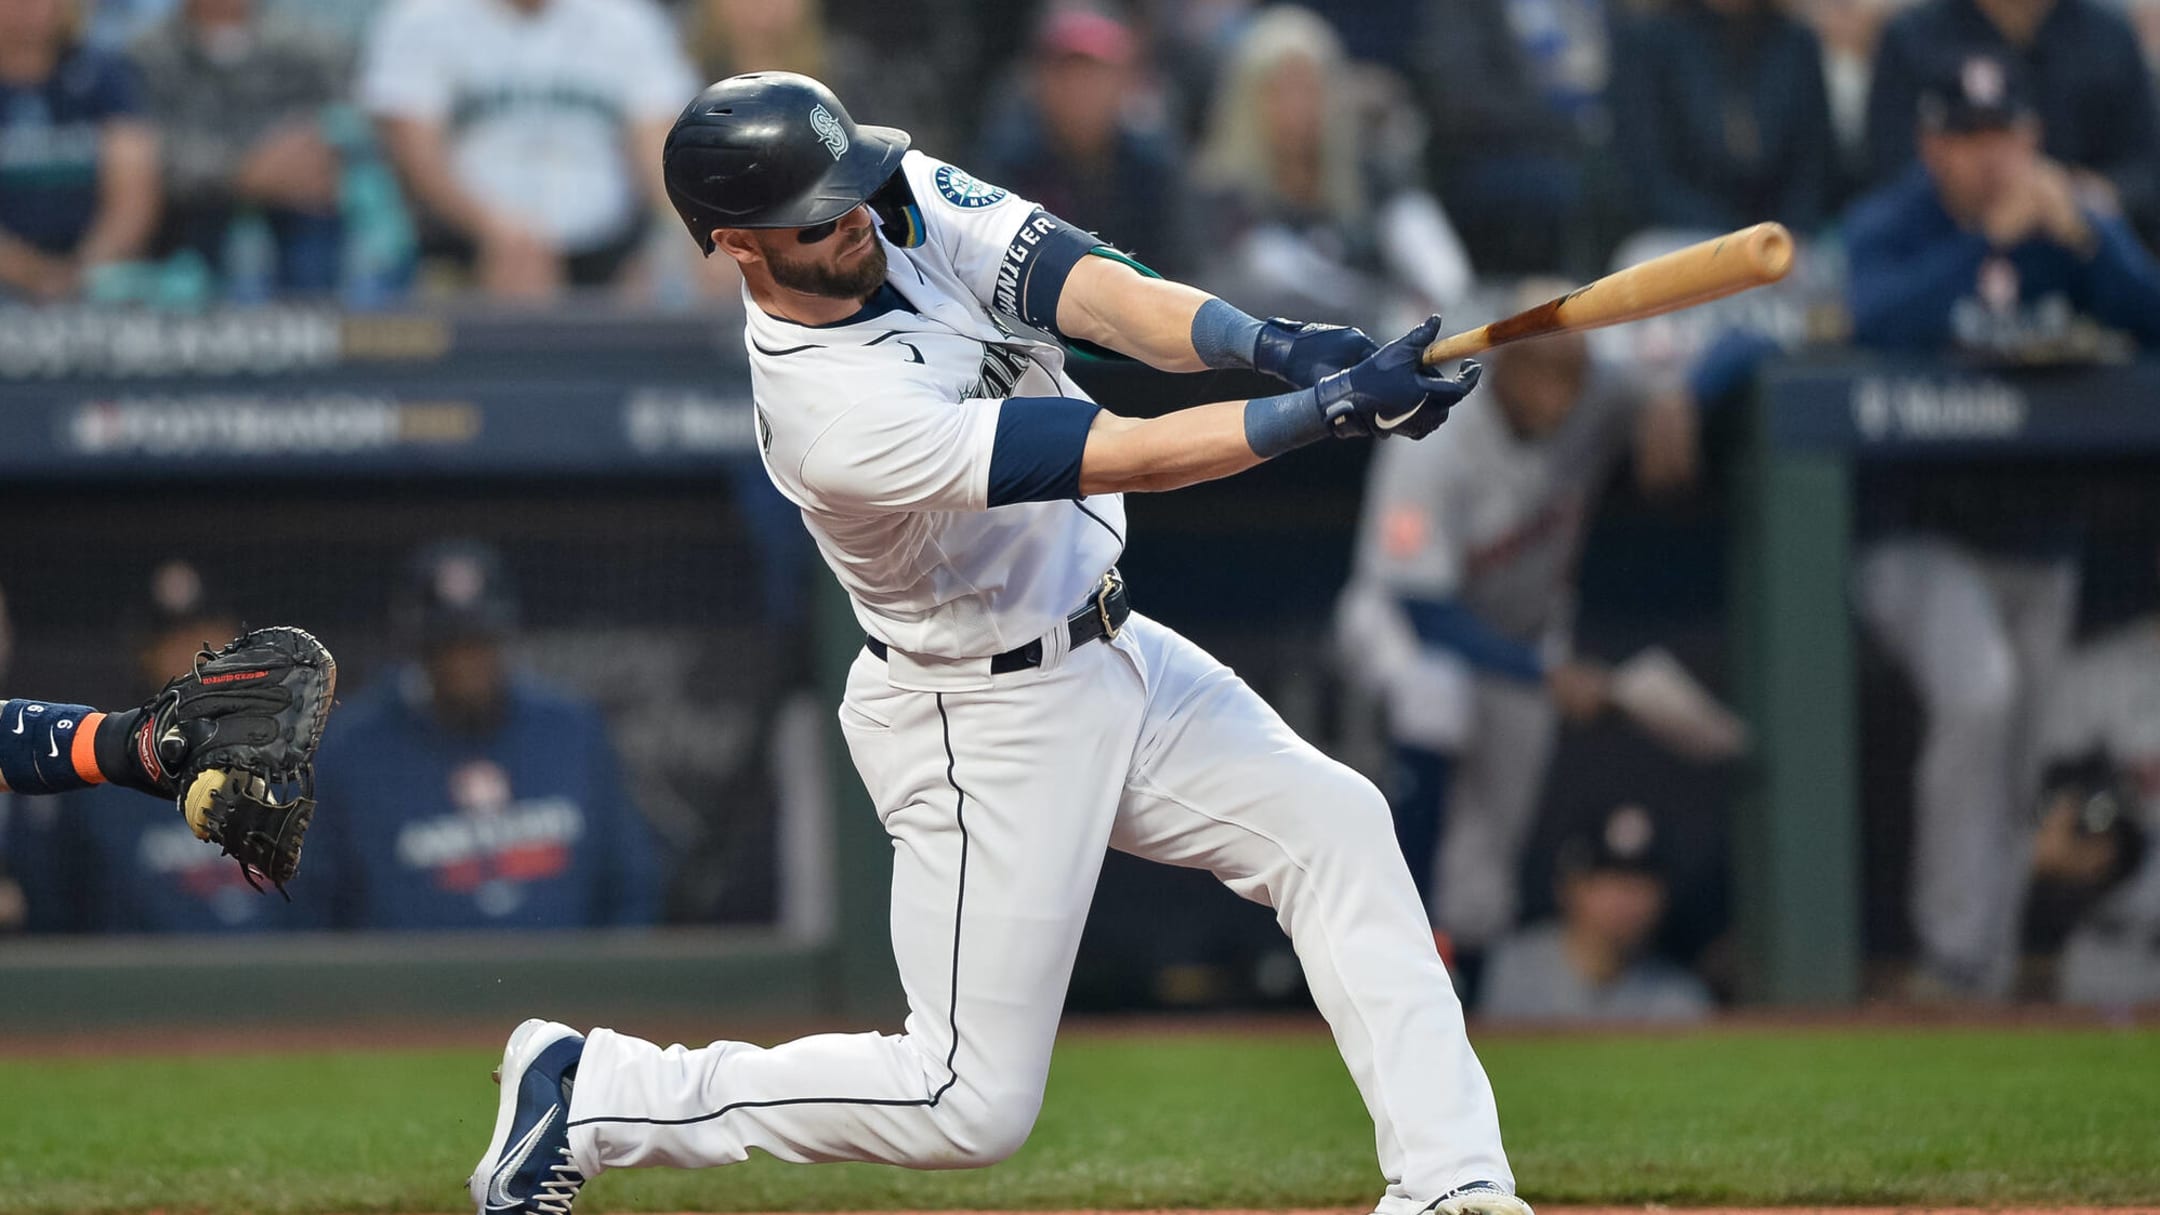 Giants, Rangers among teams interested in Mitch Haniger